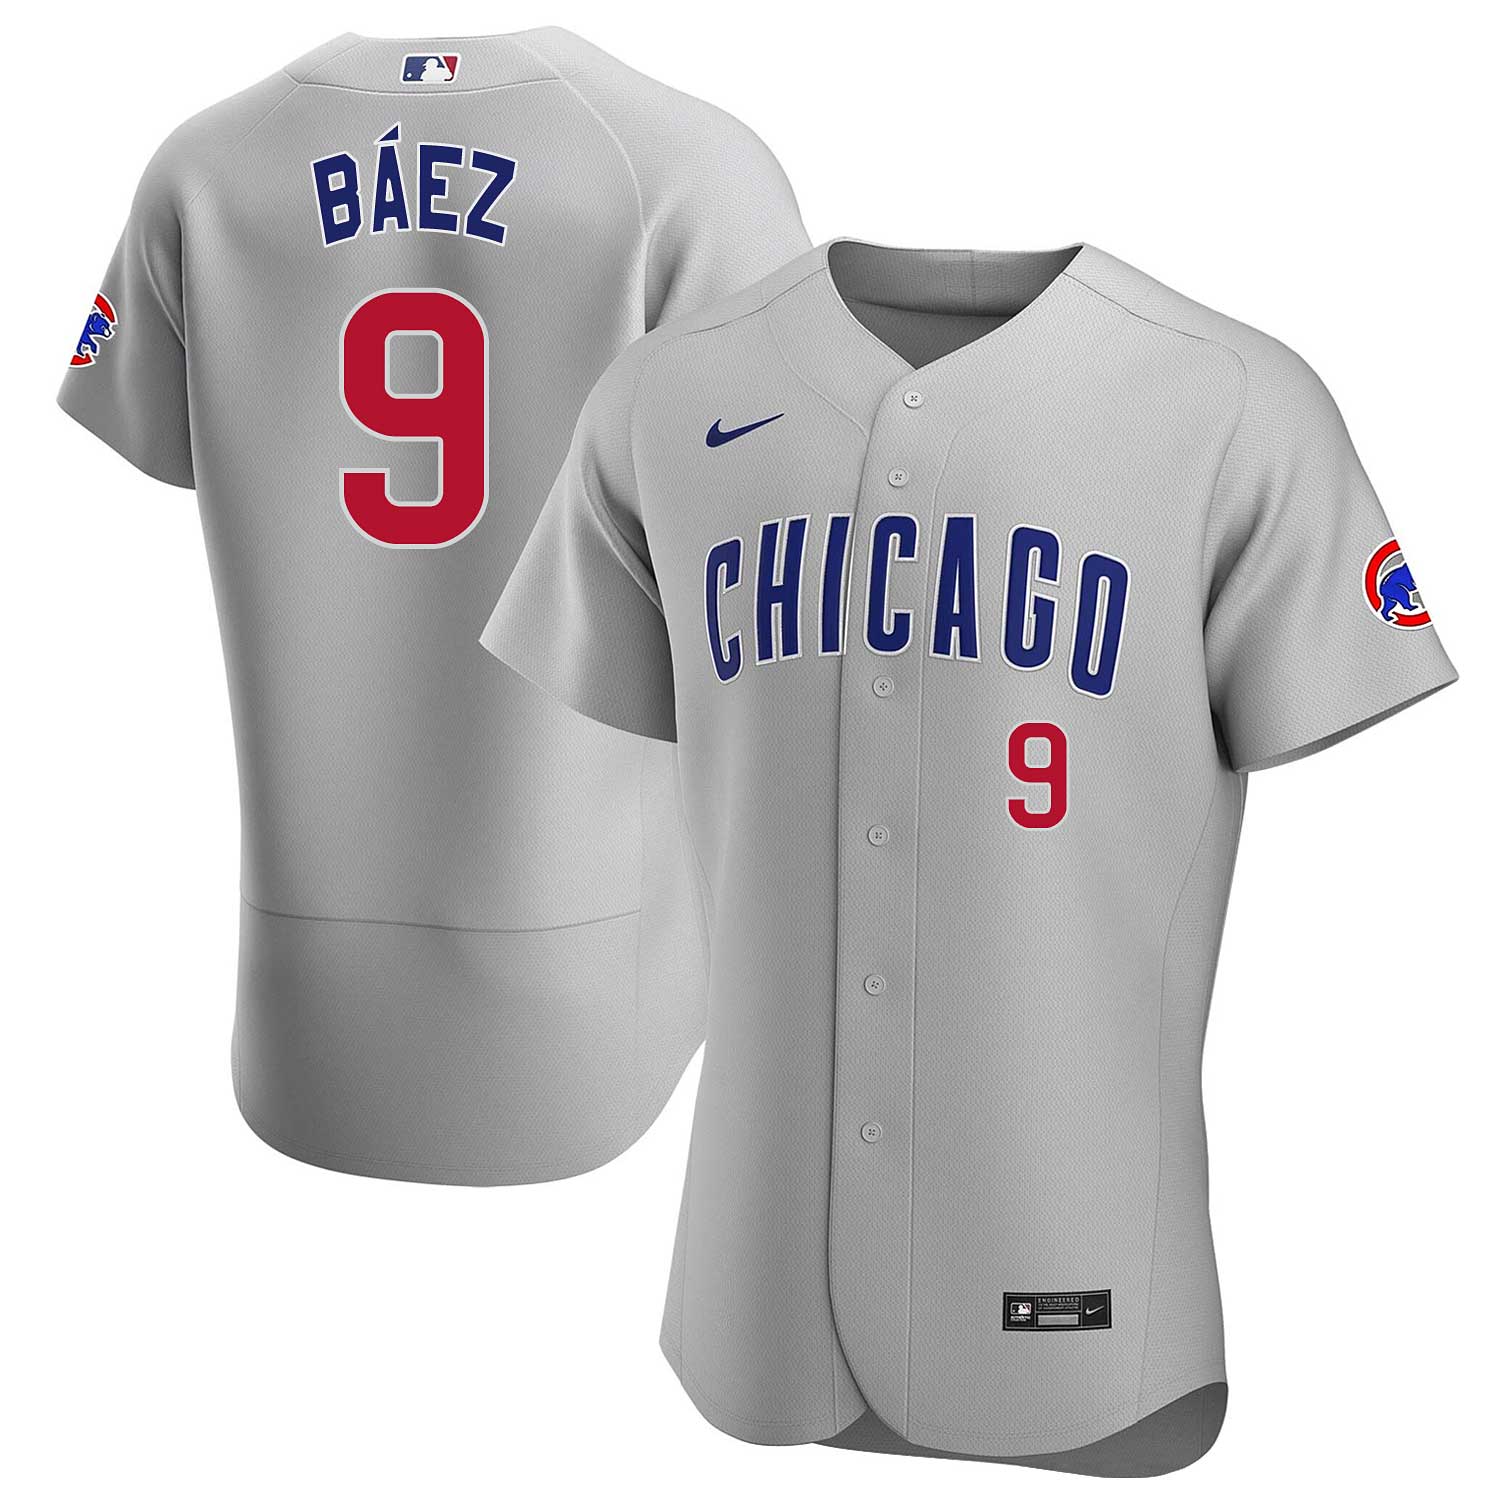 Chicago Cubs Javier Baez Nike Road Authentic Jersey 56 = 3X/4X-Large